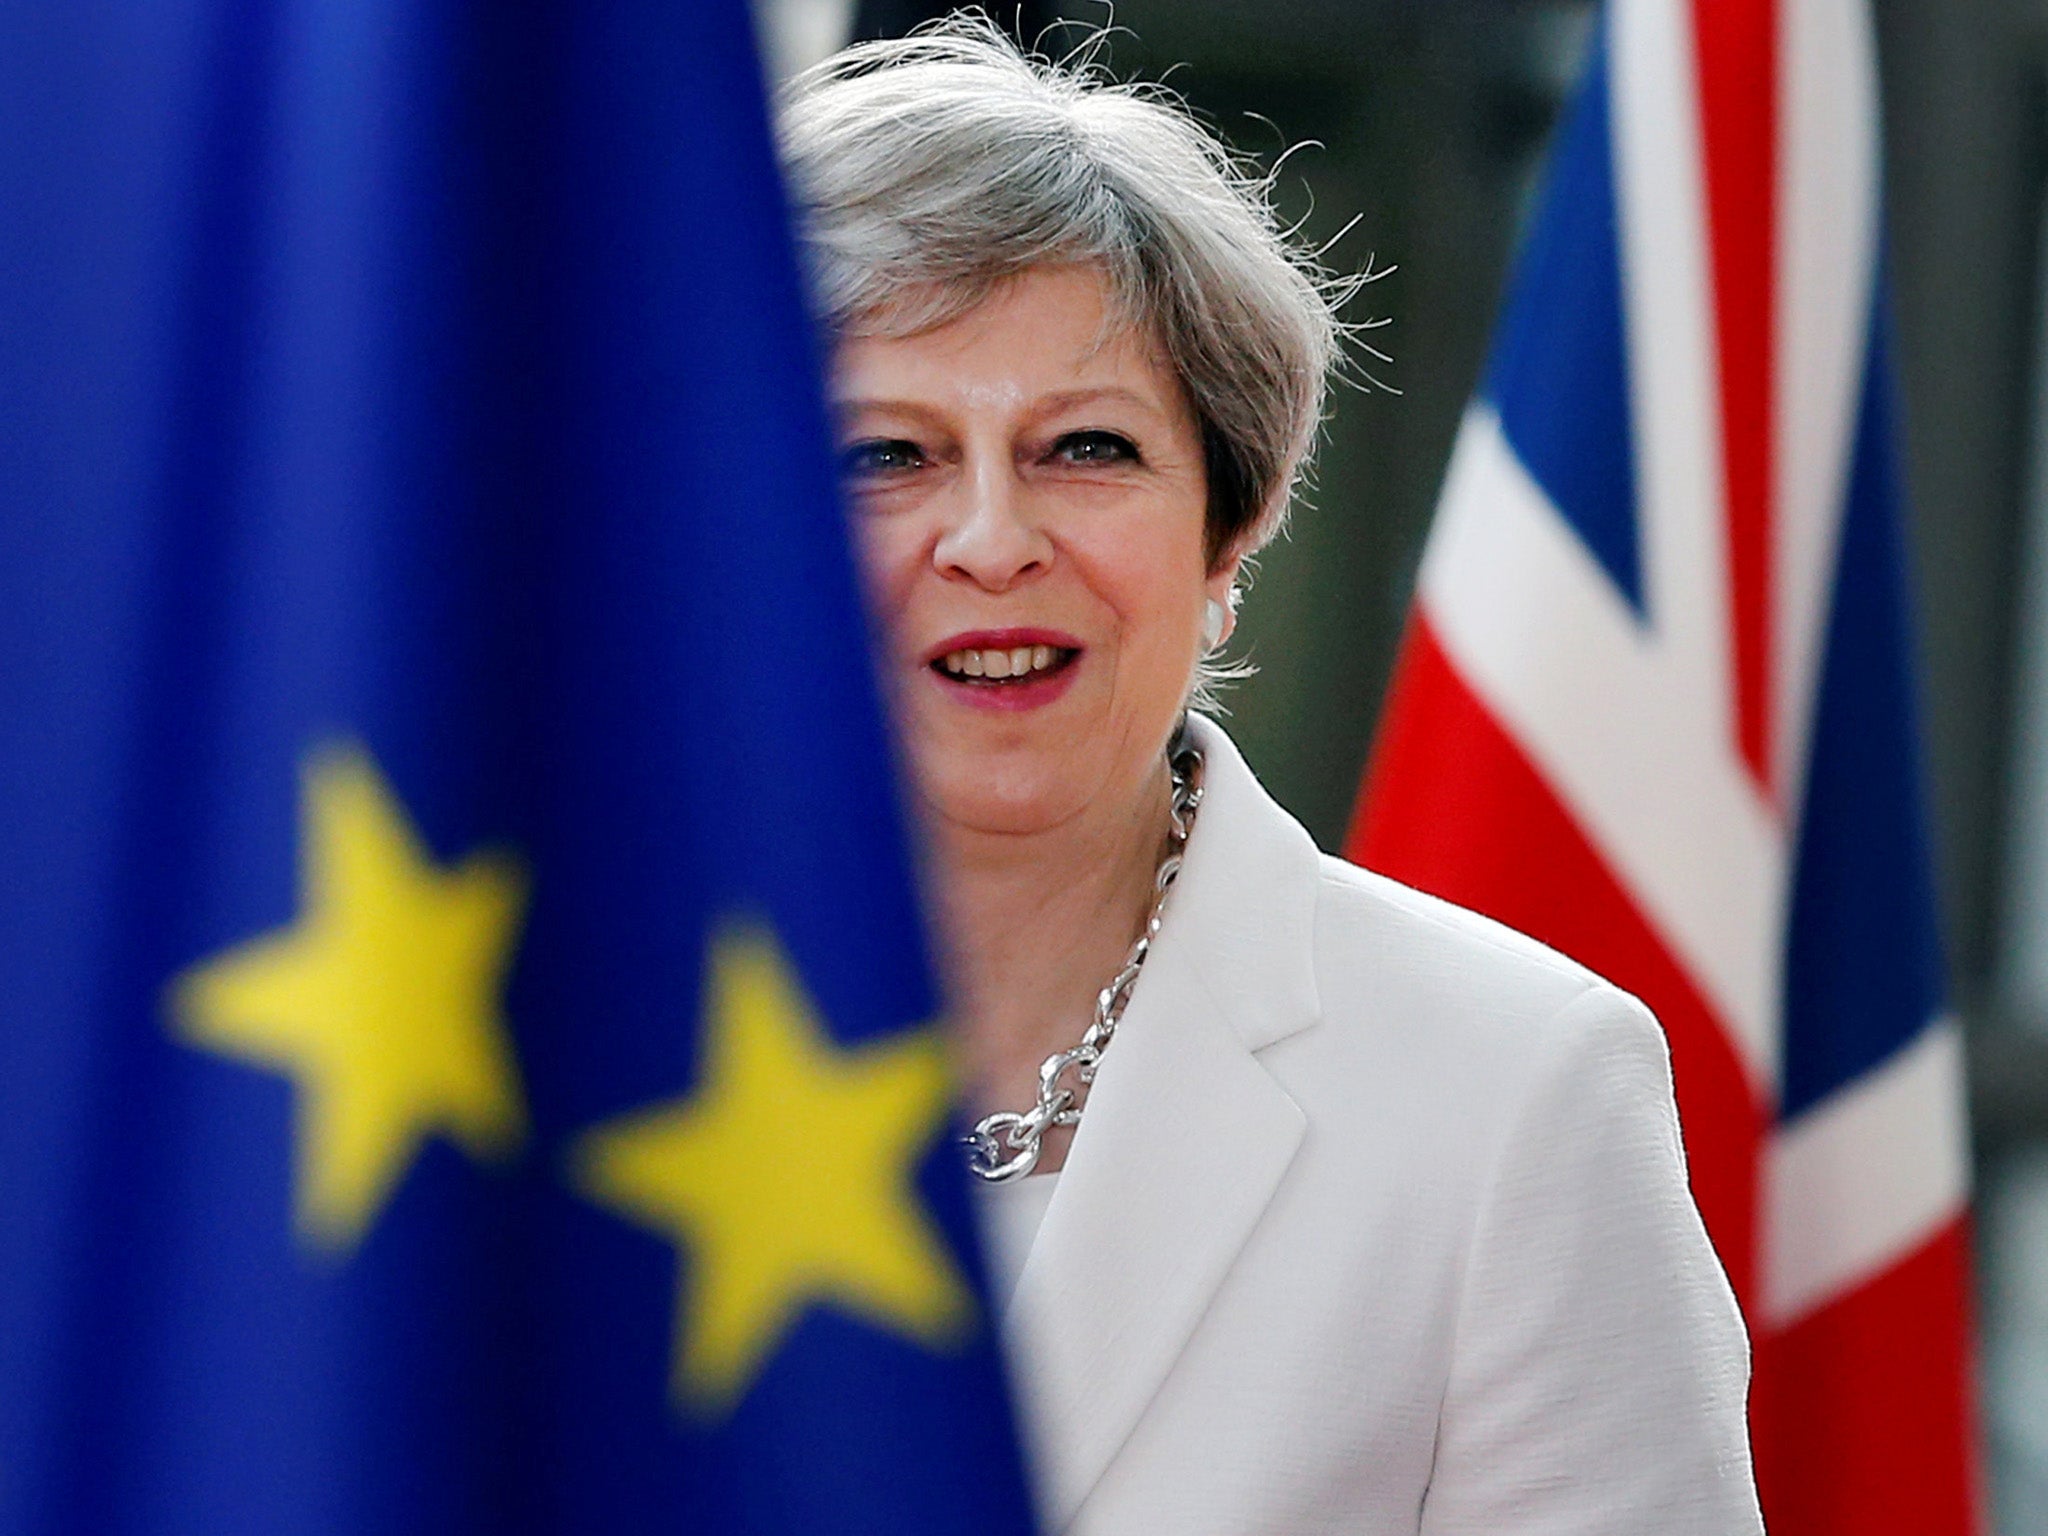 Theresa May has made a vague offer to allow EU citizens to remain in the UK after Brexit